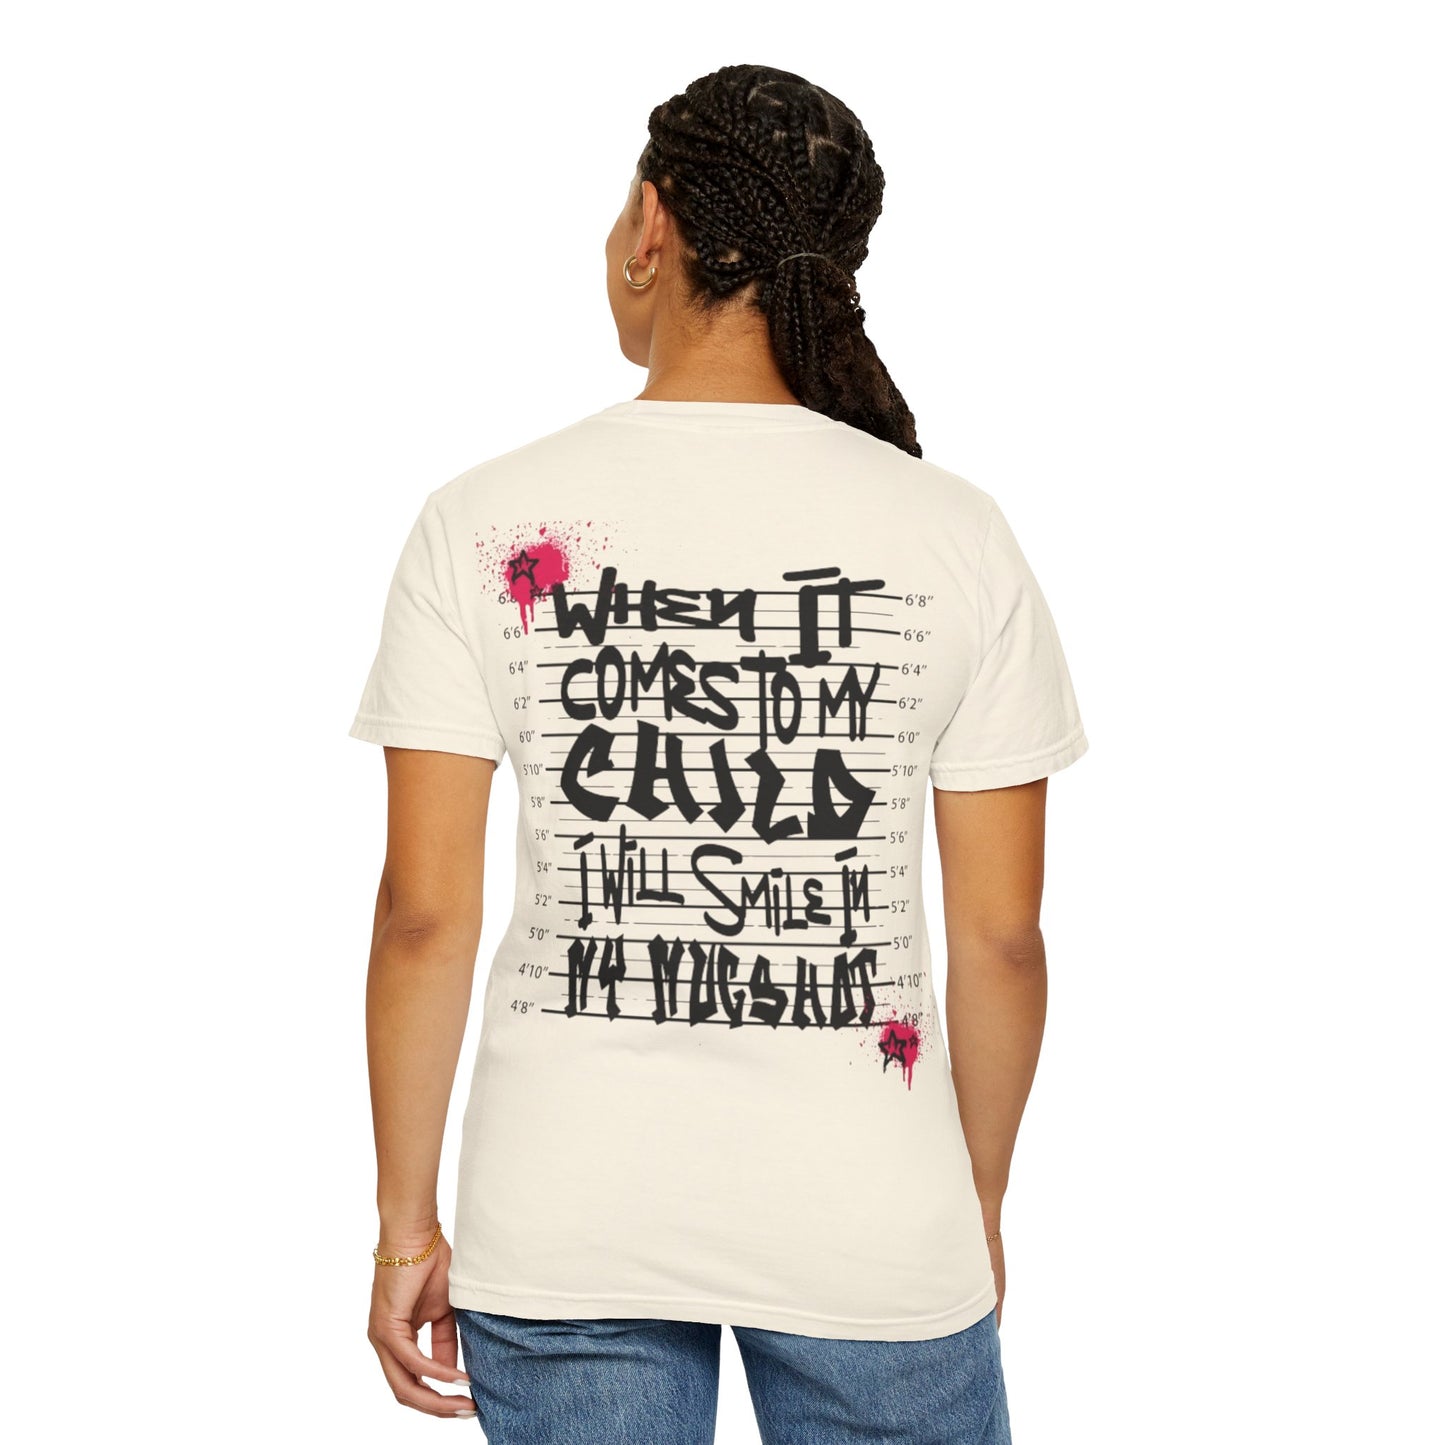 When It Comes to My Child - Unisex Garment-Dyed T-shirt